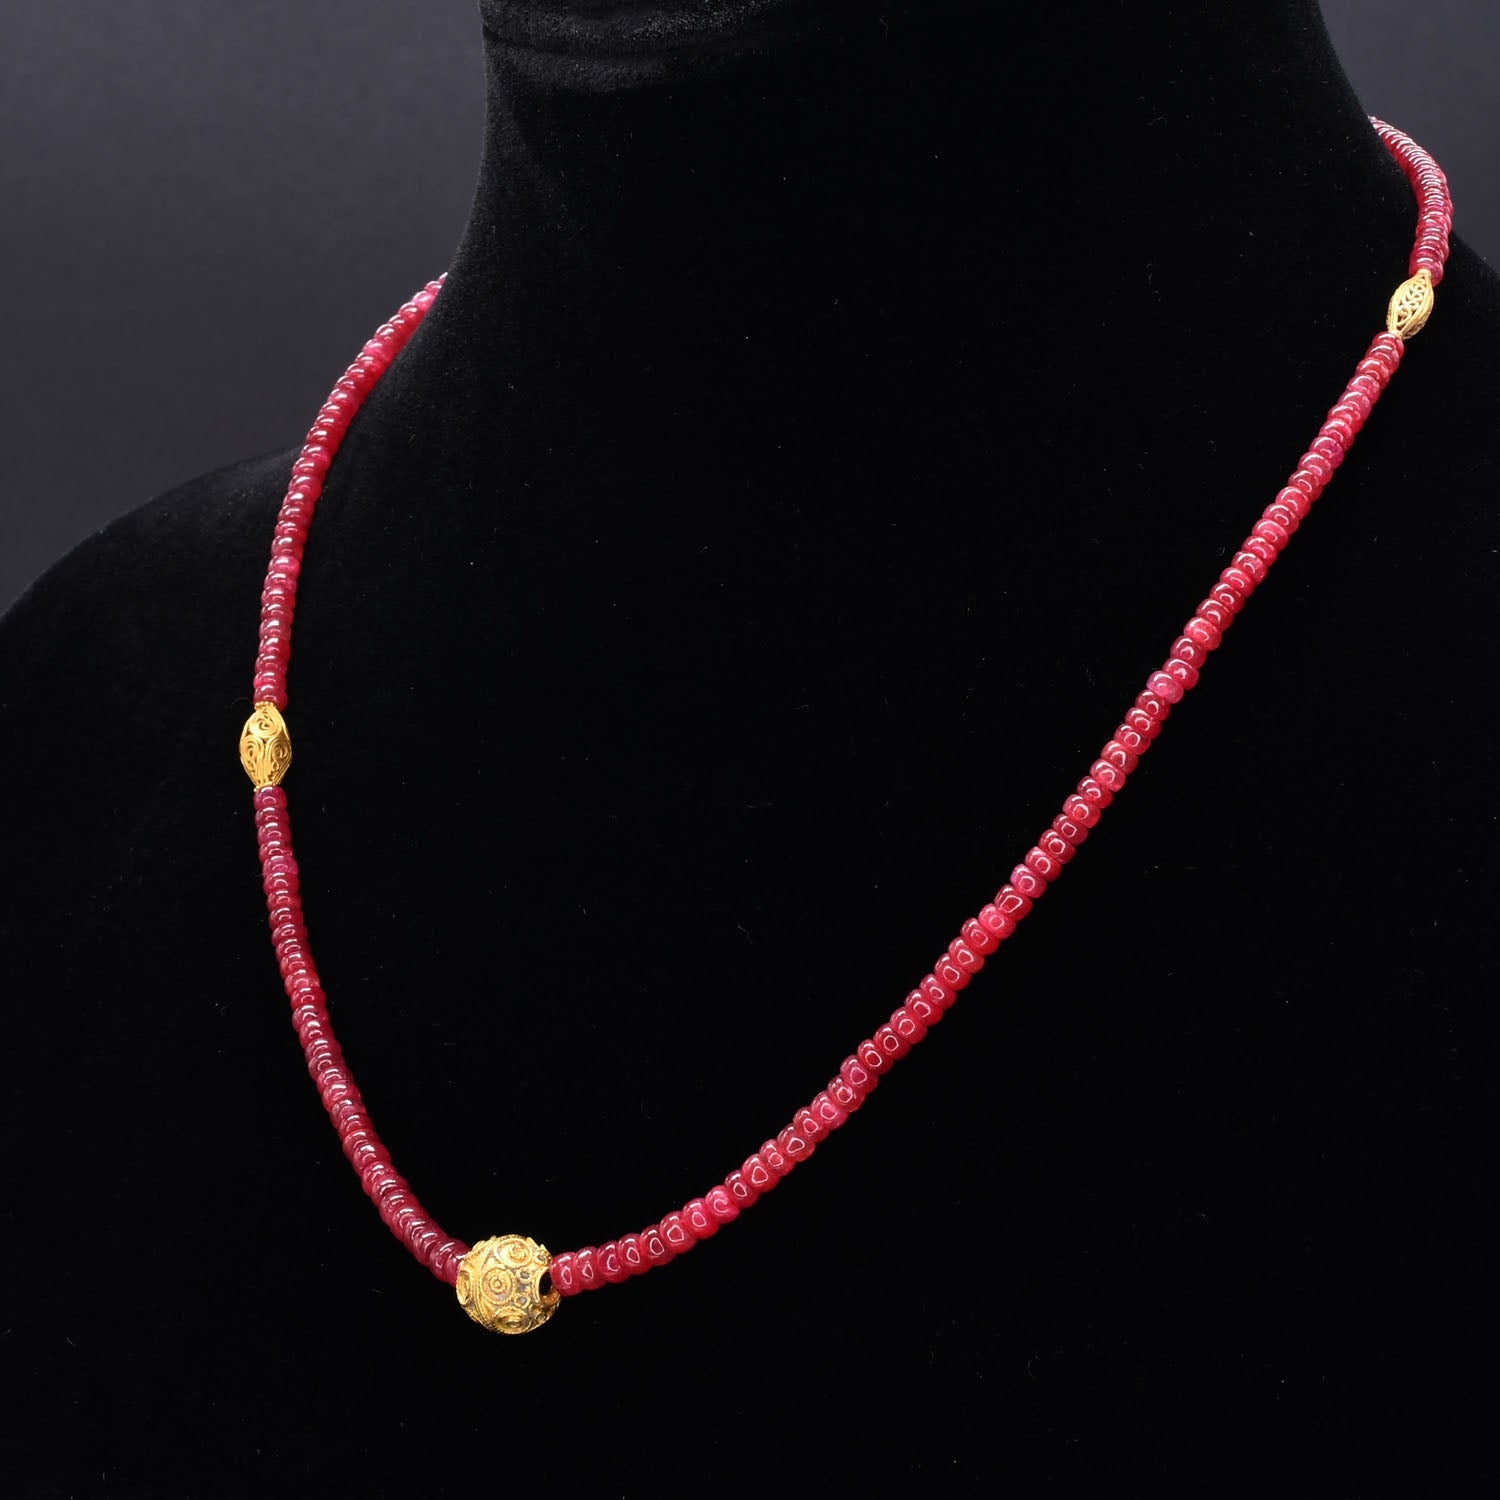 A beautiful Ruby Necklace with Late (ca. 8th - 9th century CE) Byzantine Gold Beads